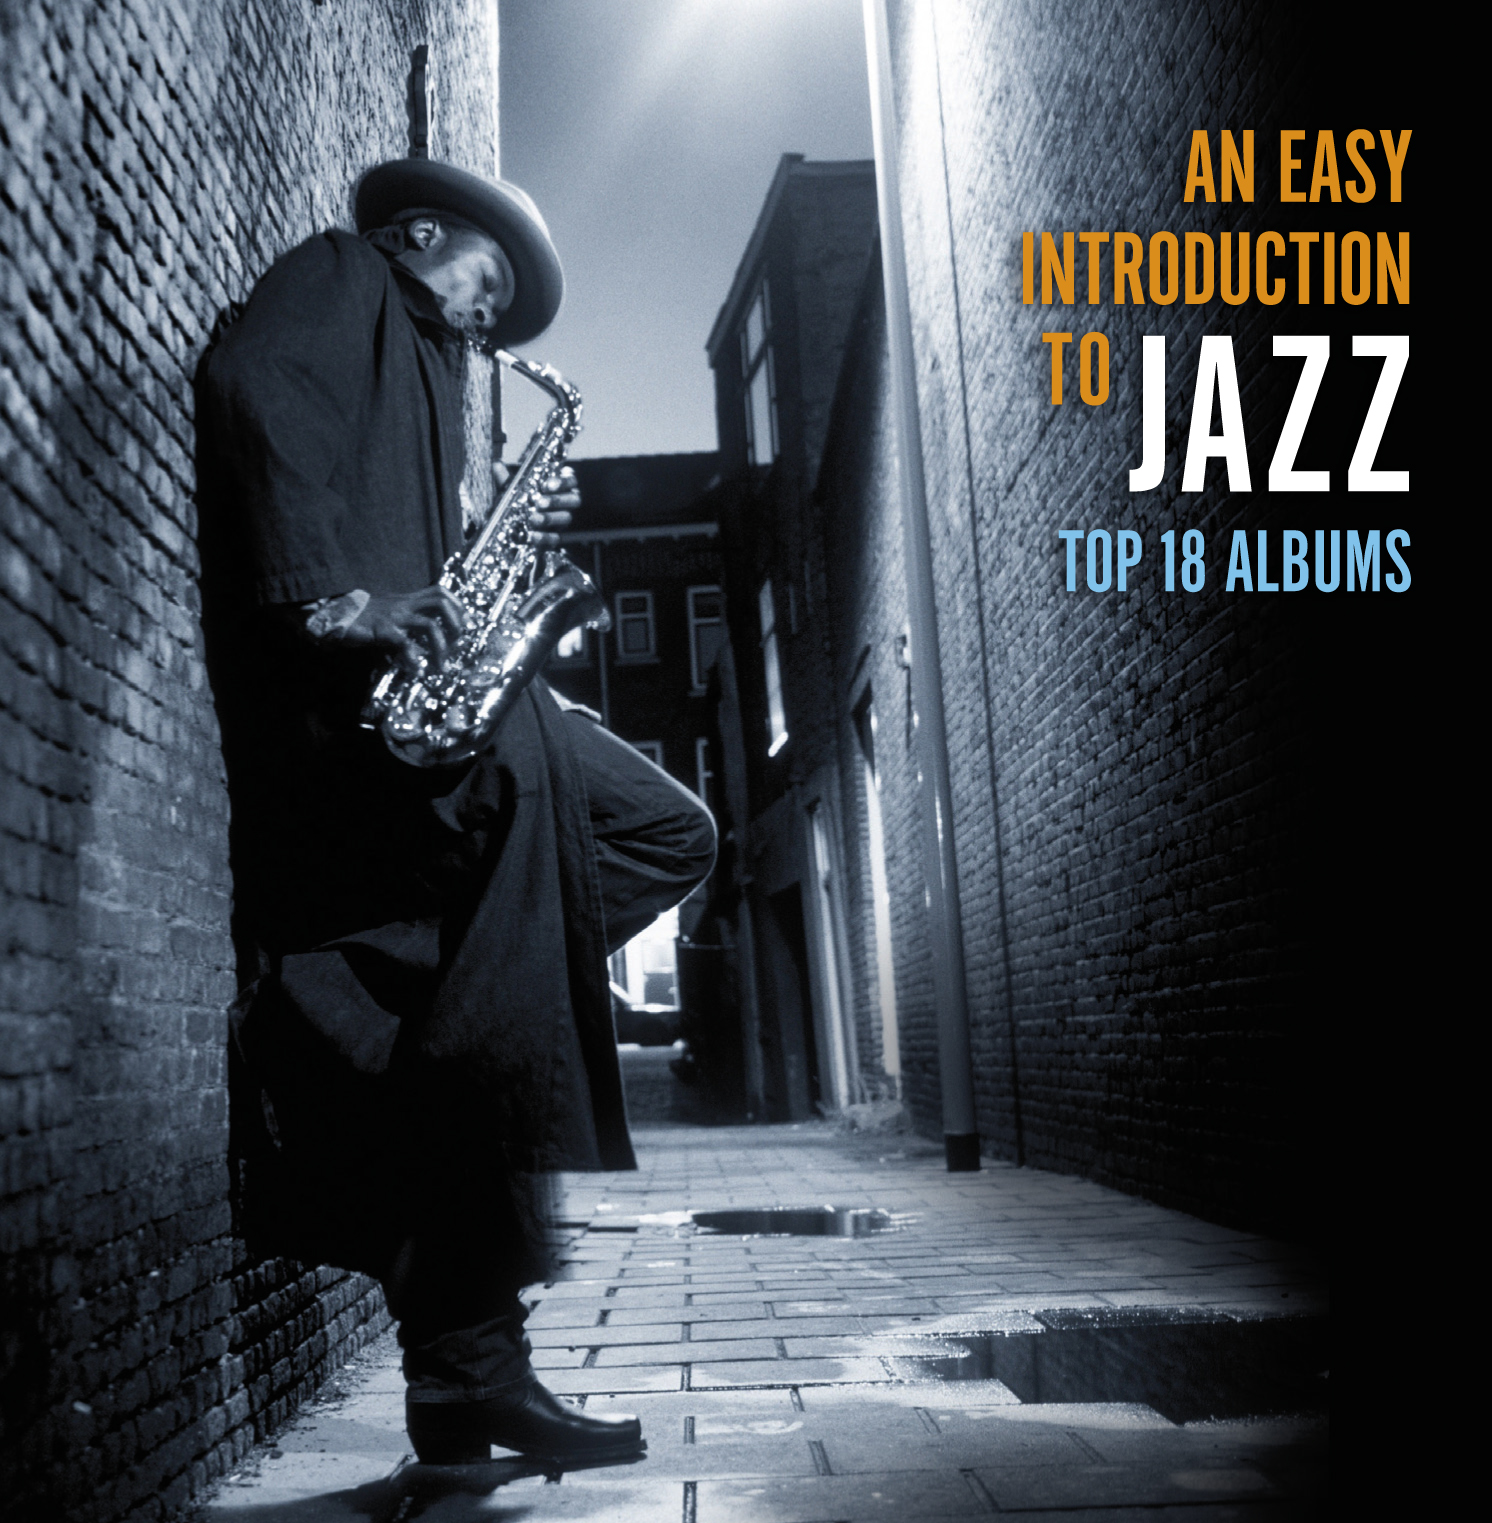 An Easy Introduction To Jazz Top 18 Albums (10cd Set) MVD